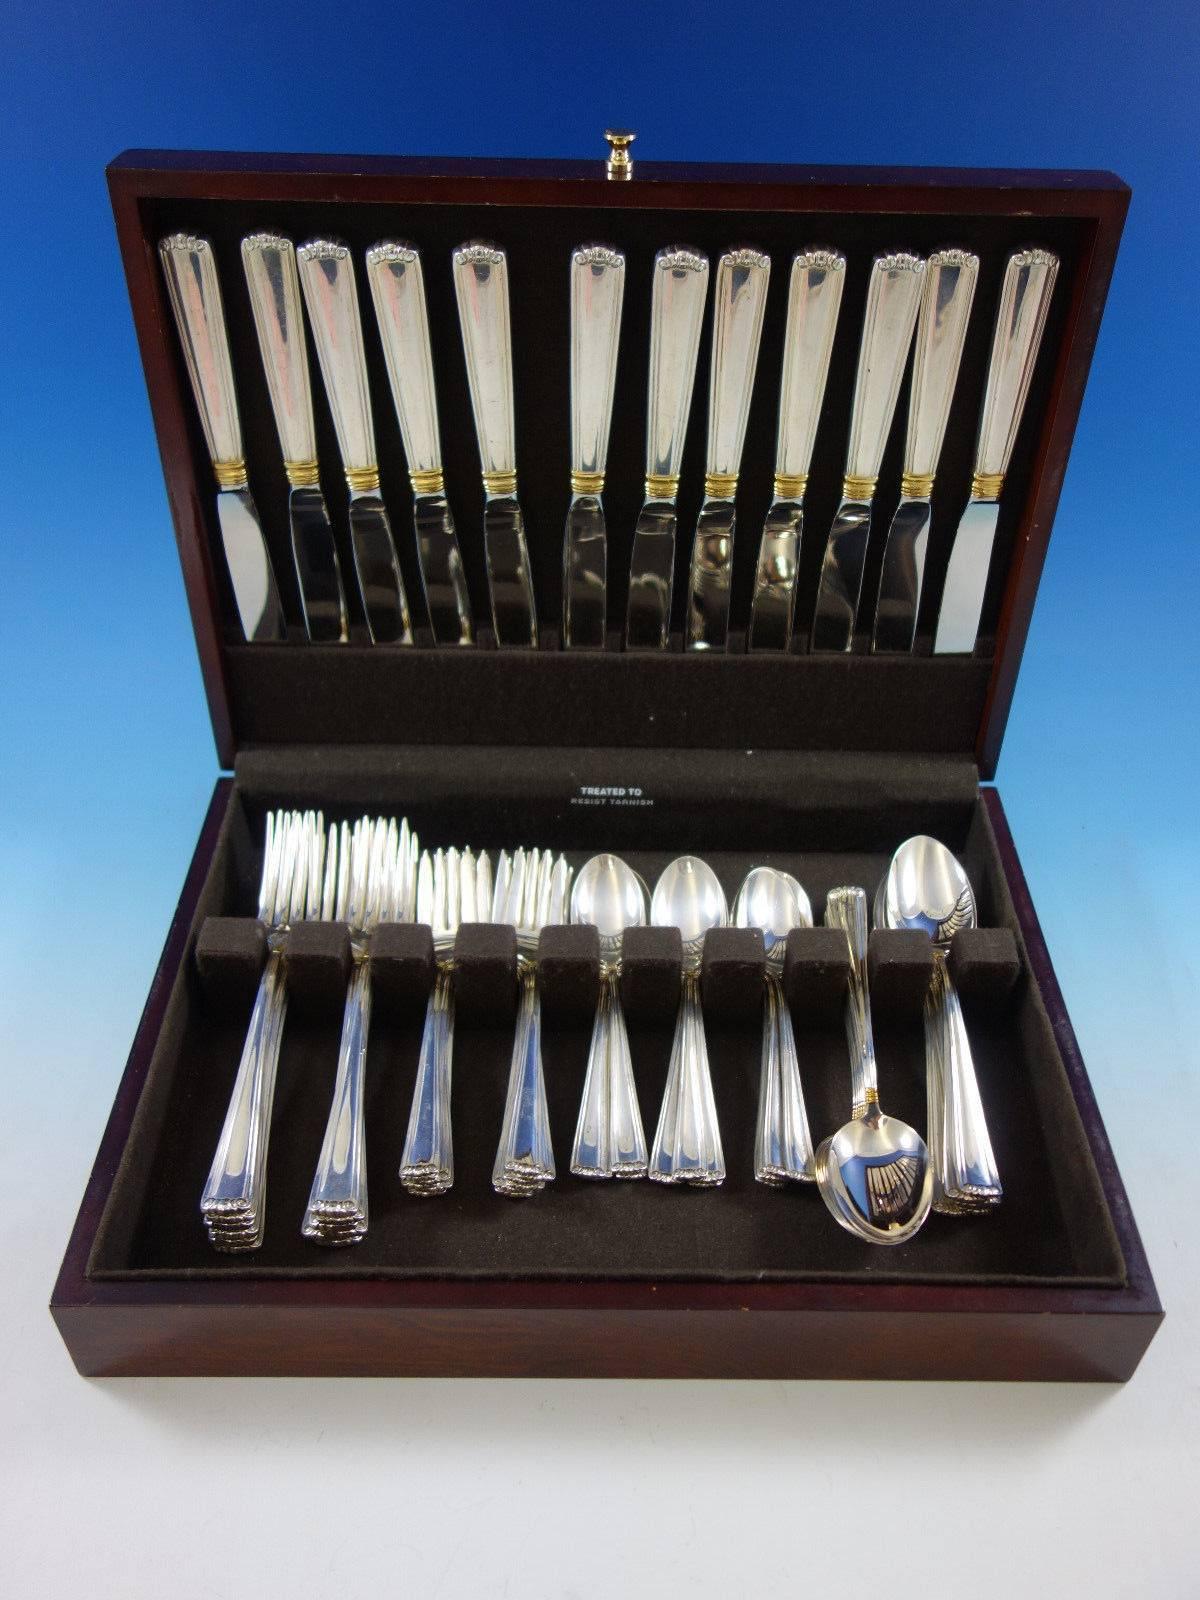 Embassy Scroll Gold by Lunt sterling silver flatware set of 60 pieces. This set includes: 

12 dinner size knives, 9 1/4